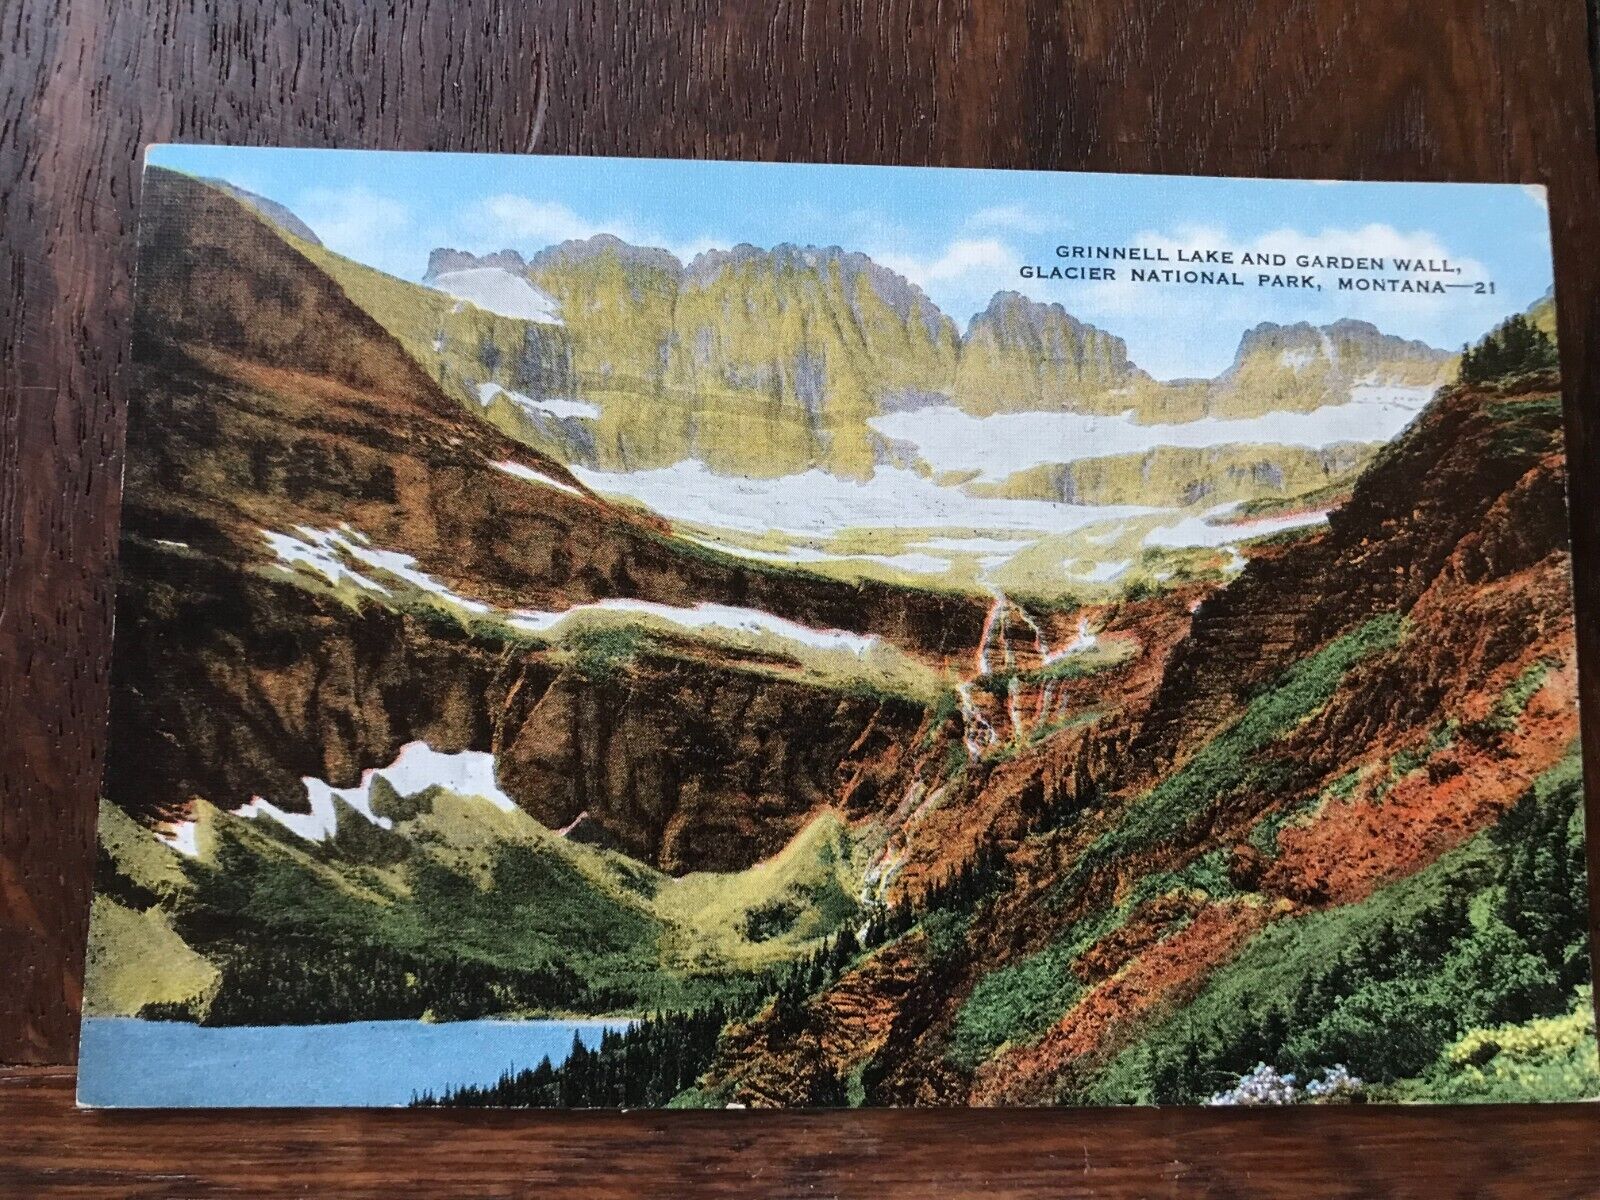 Grinnell Lake and Garden Wall Glacier National Park Montana Postcard